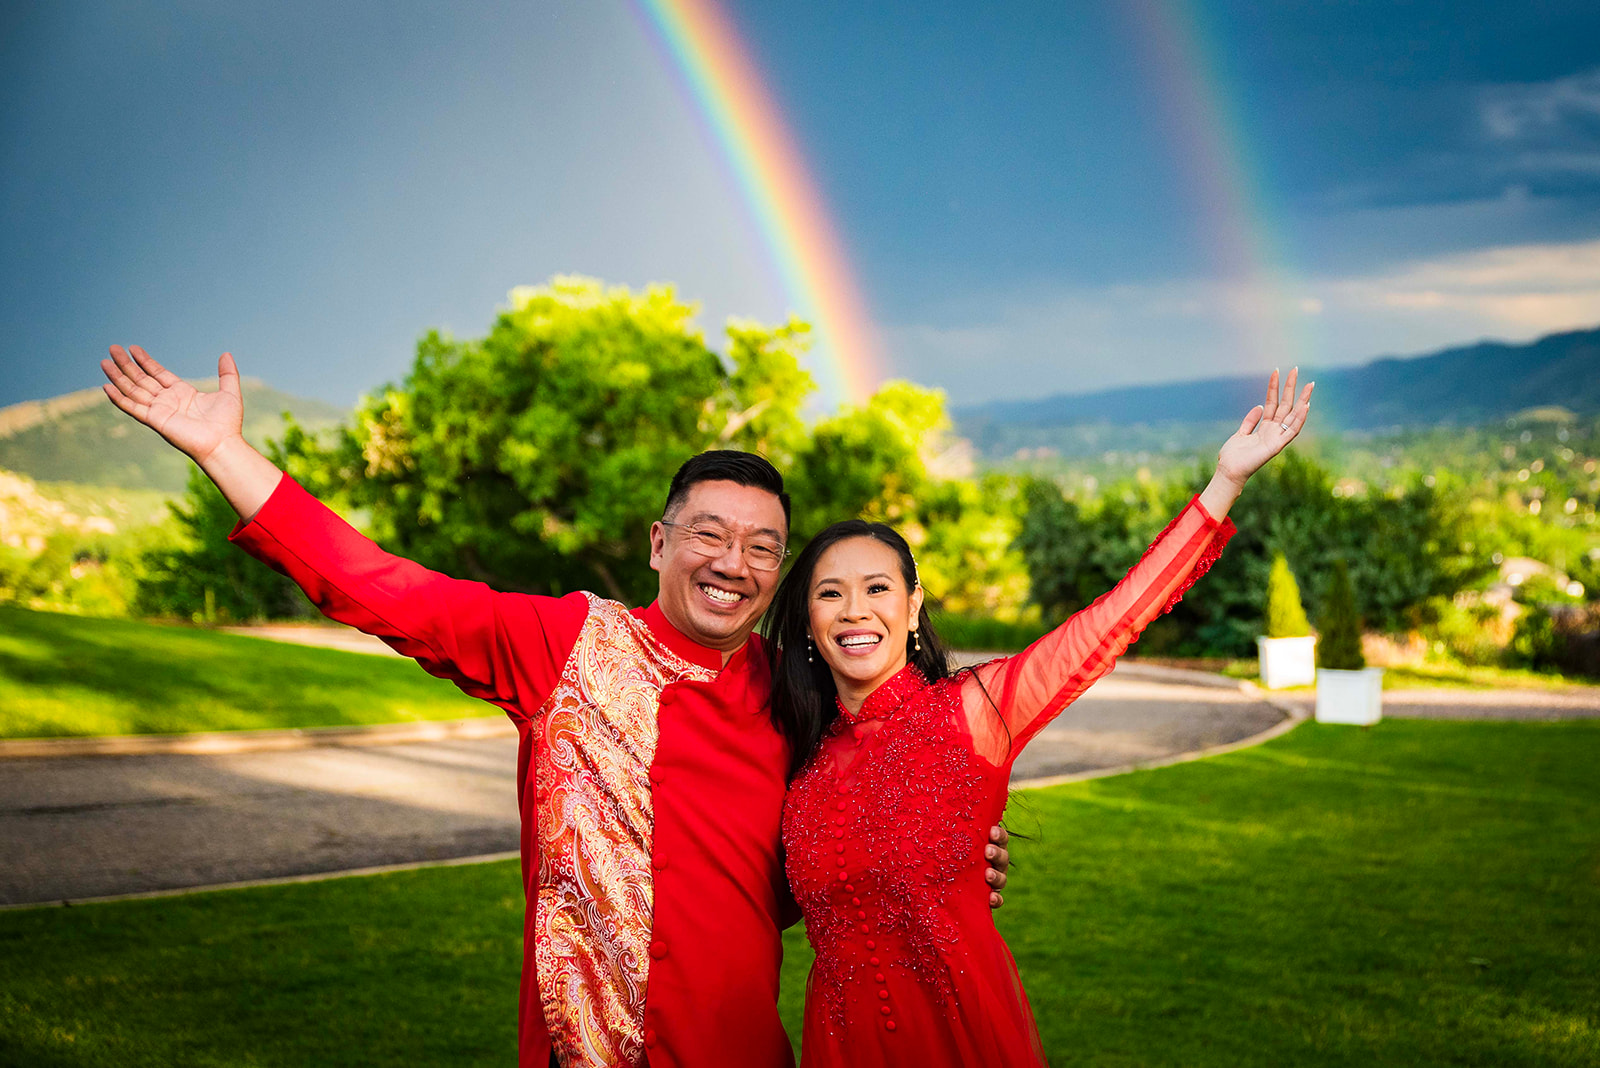 Couple dressed in traditional Vietnamese outfits raises their arms in celebration with a double rainbow behind them.